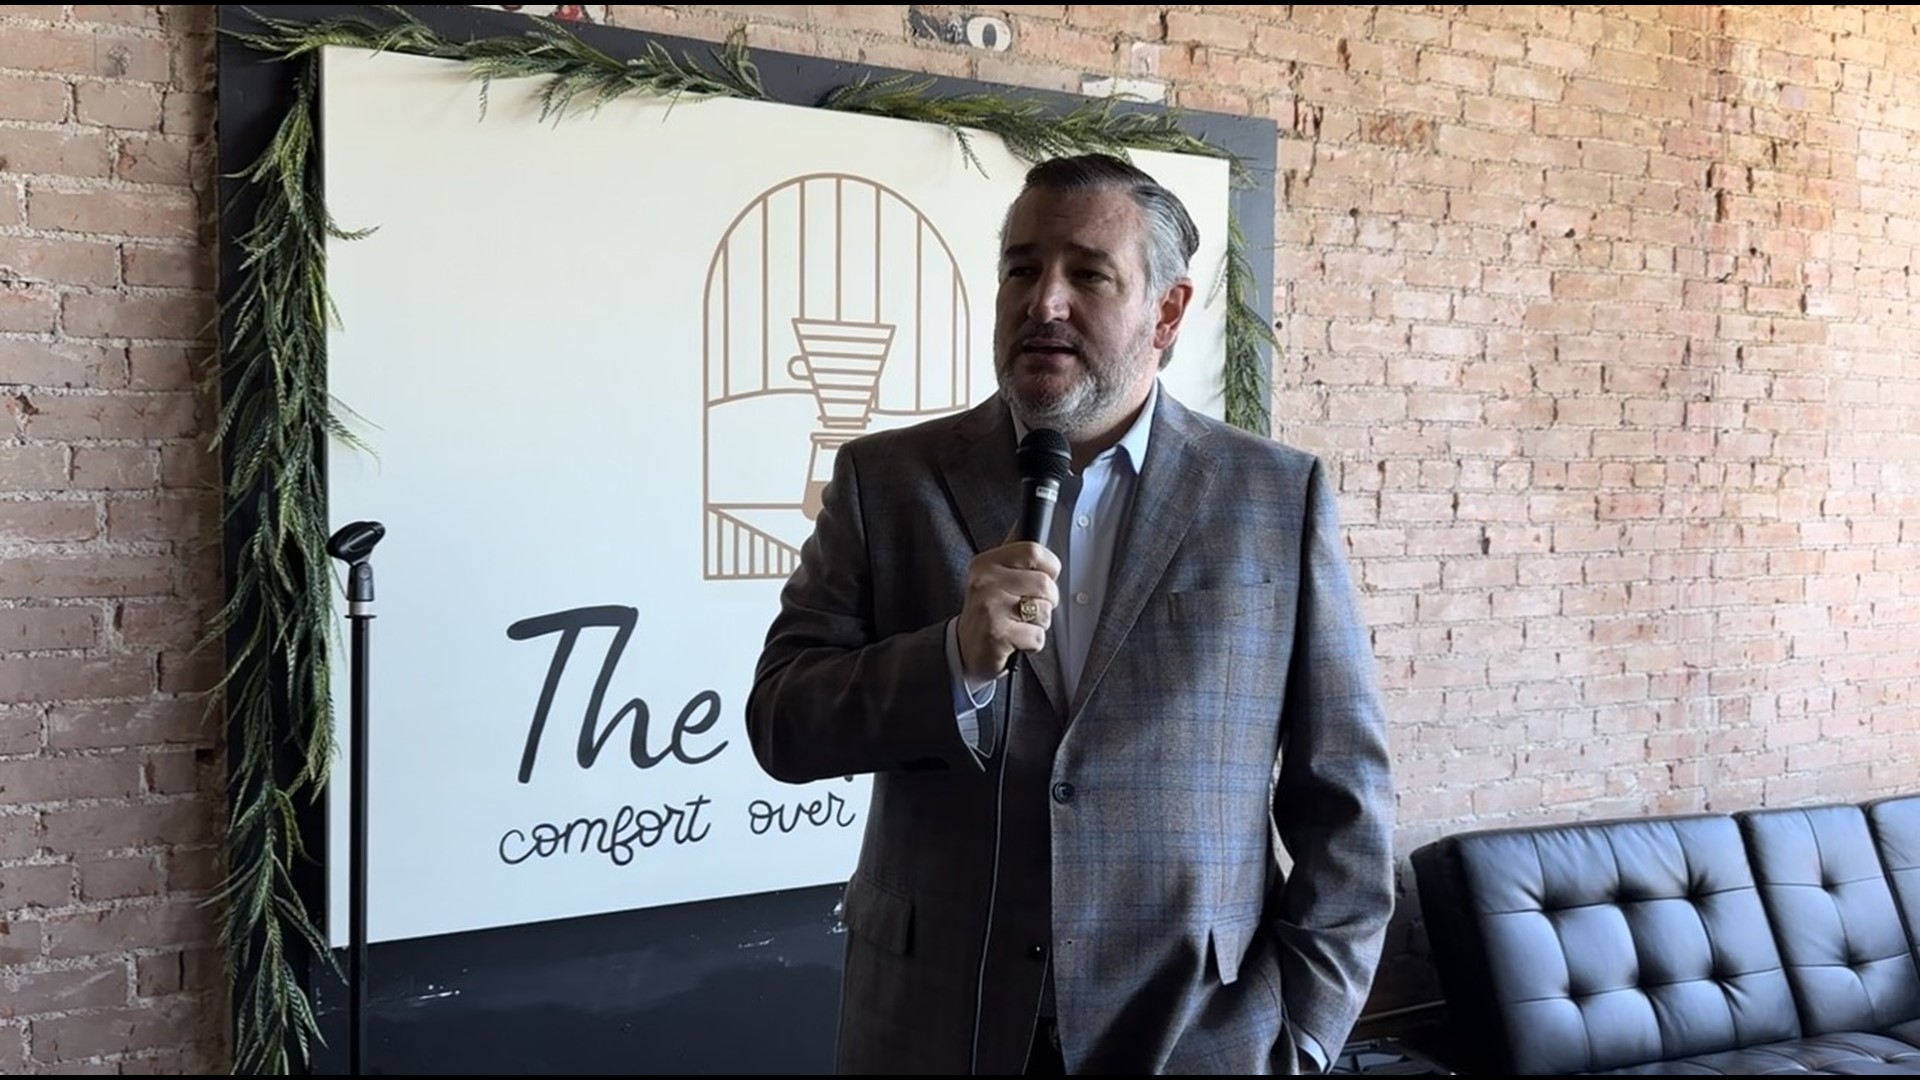 Senator Ted Cruz visited San Angelo on Thursday and spoke with Damien Bartonek from FOX West Texas about numerous topics involving national and local issues.